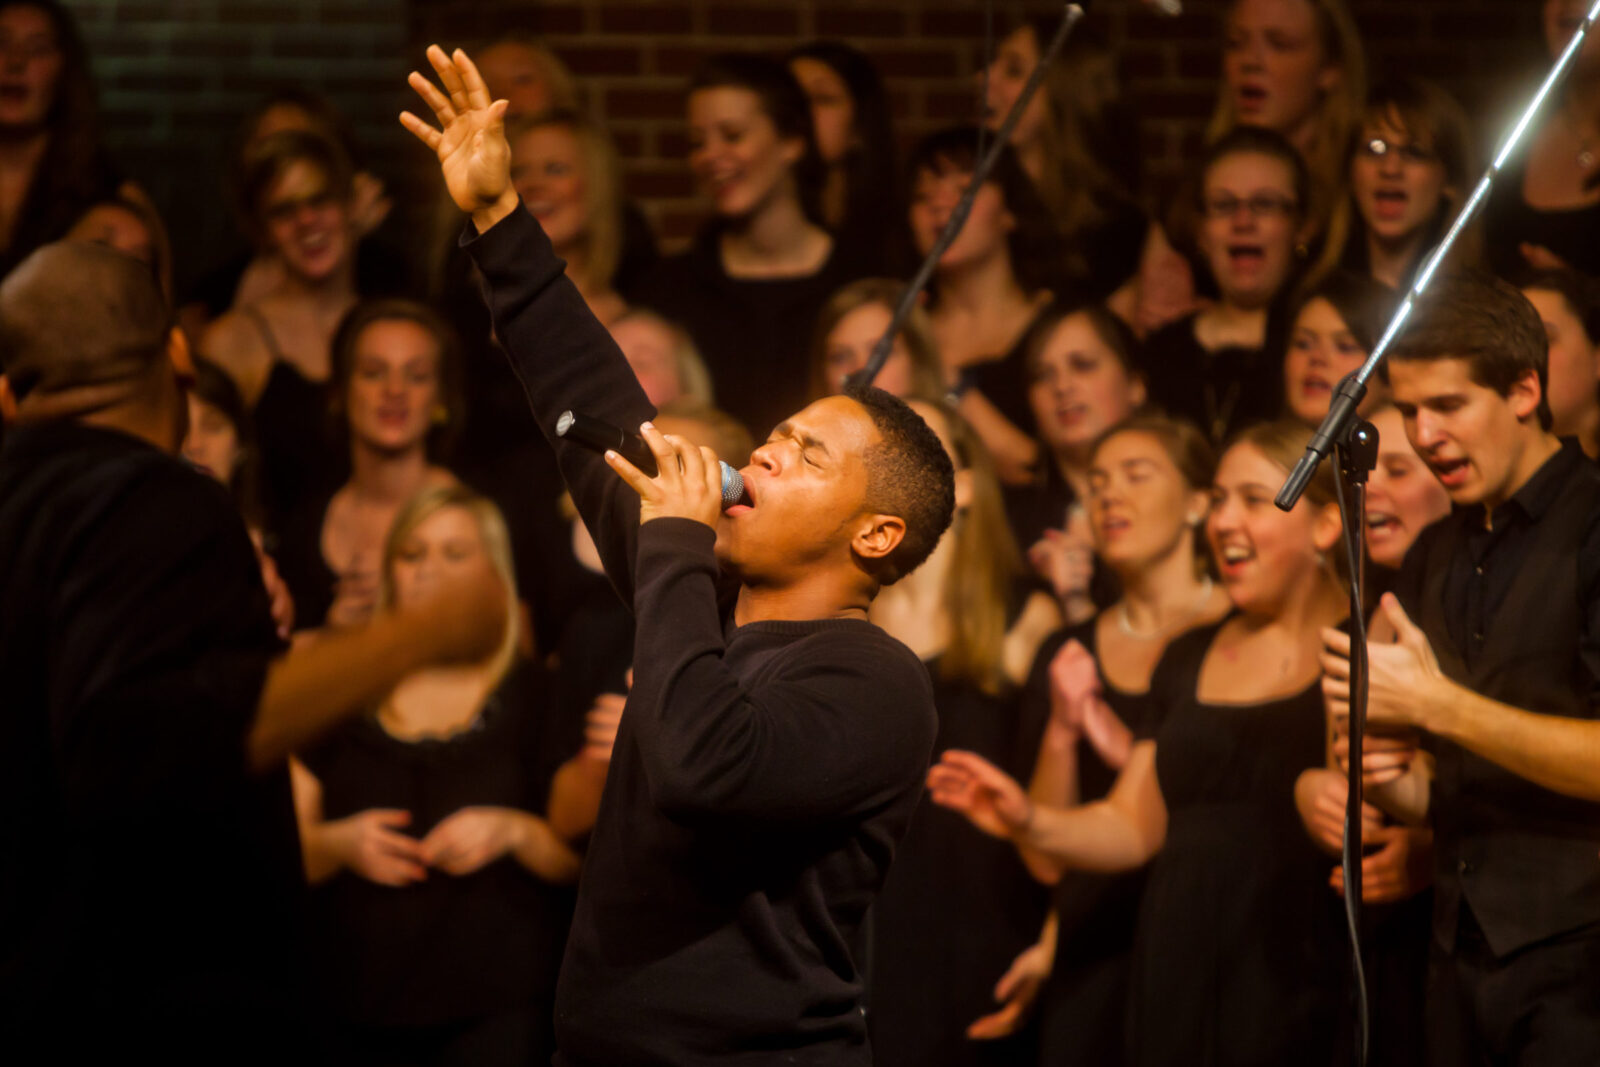 GRAMMY-Nominated Gospel Singer and Chicago-Based Artists to Perform at North Park University